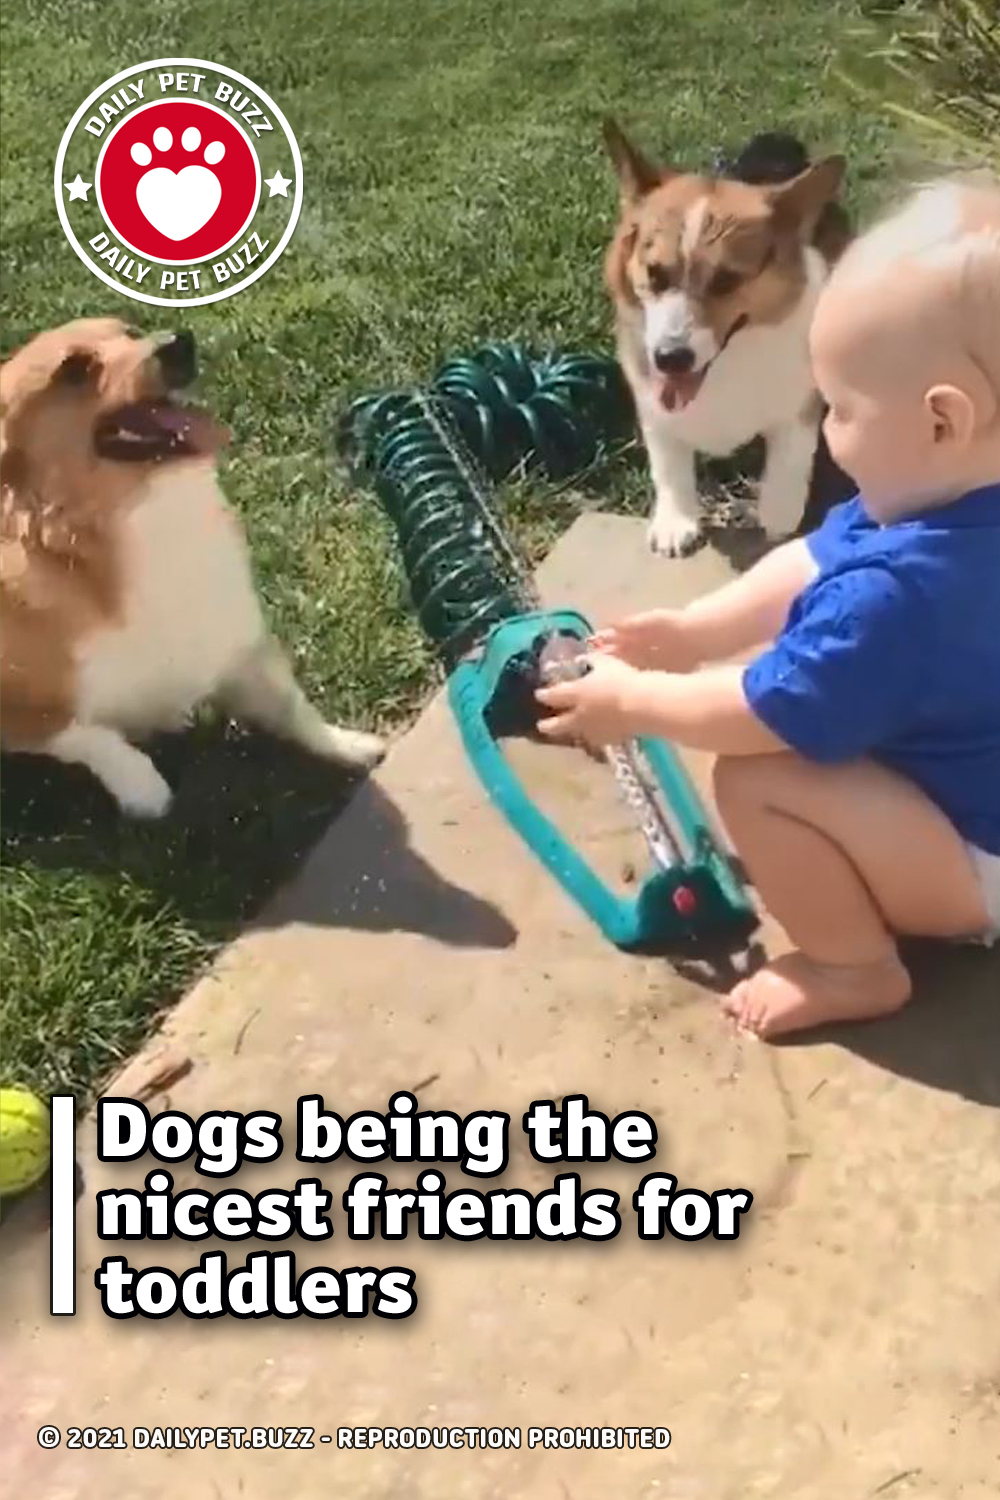 Dogs being the nicest friends for toddlers